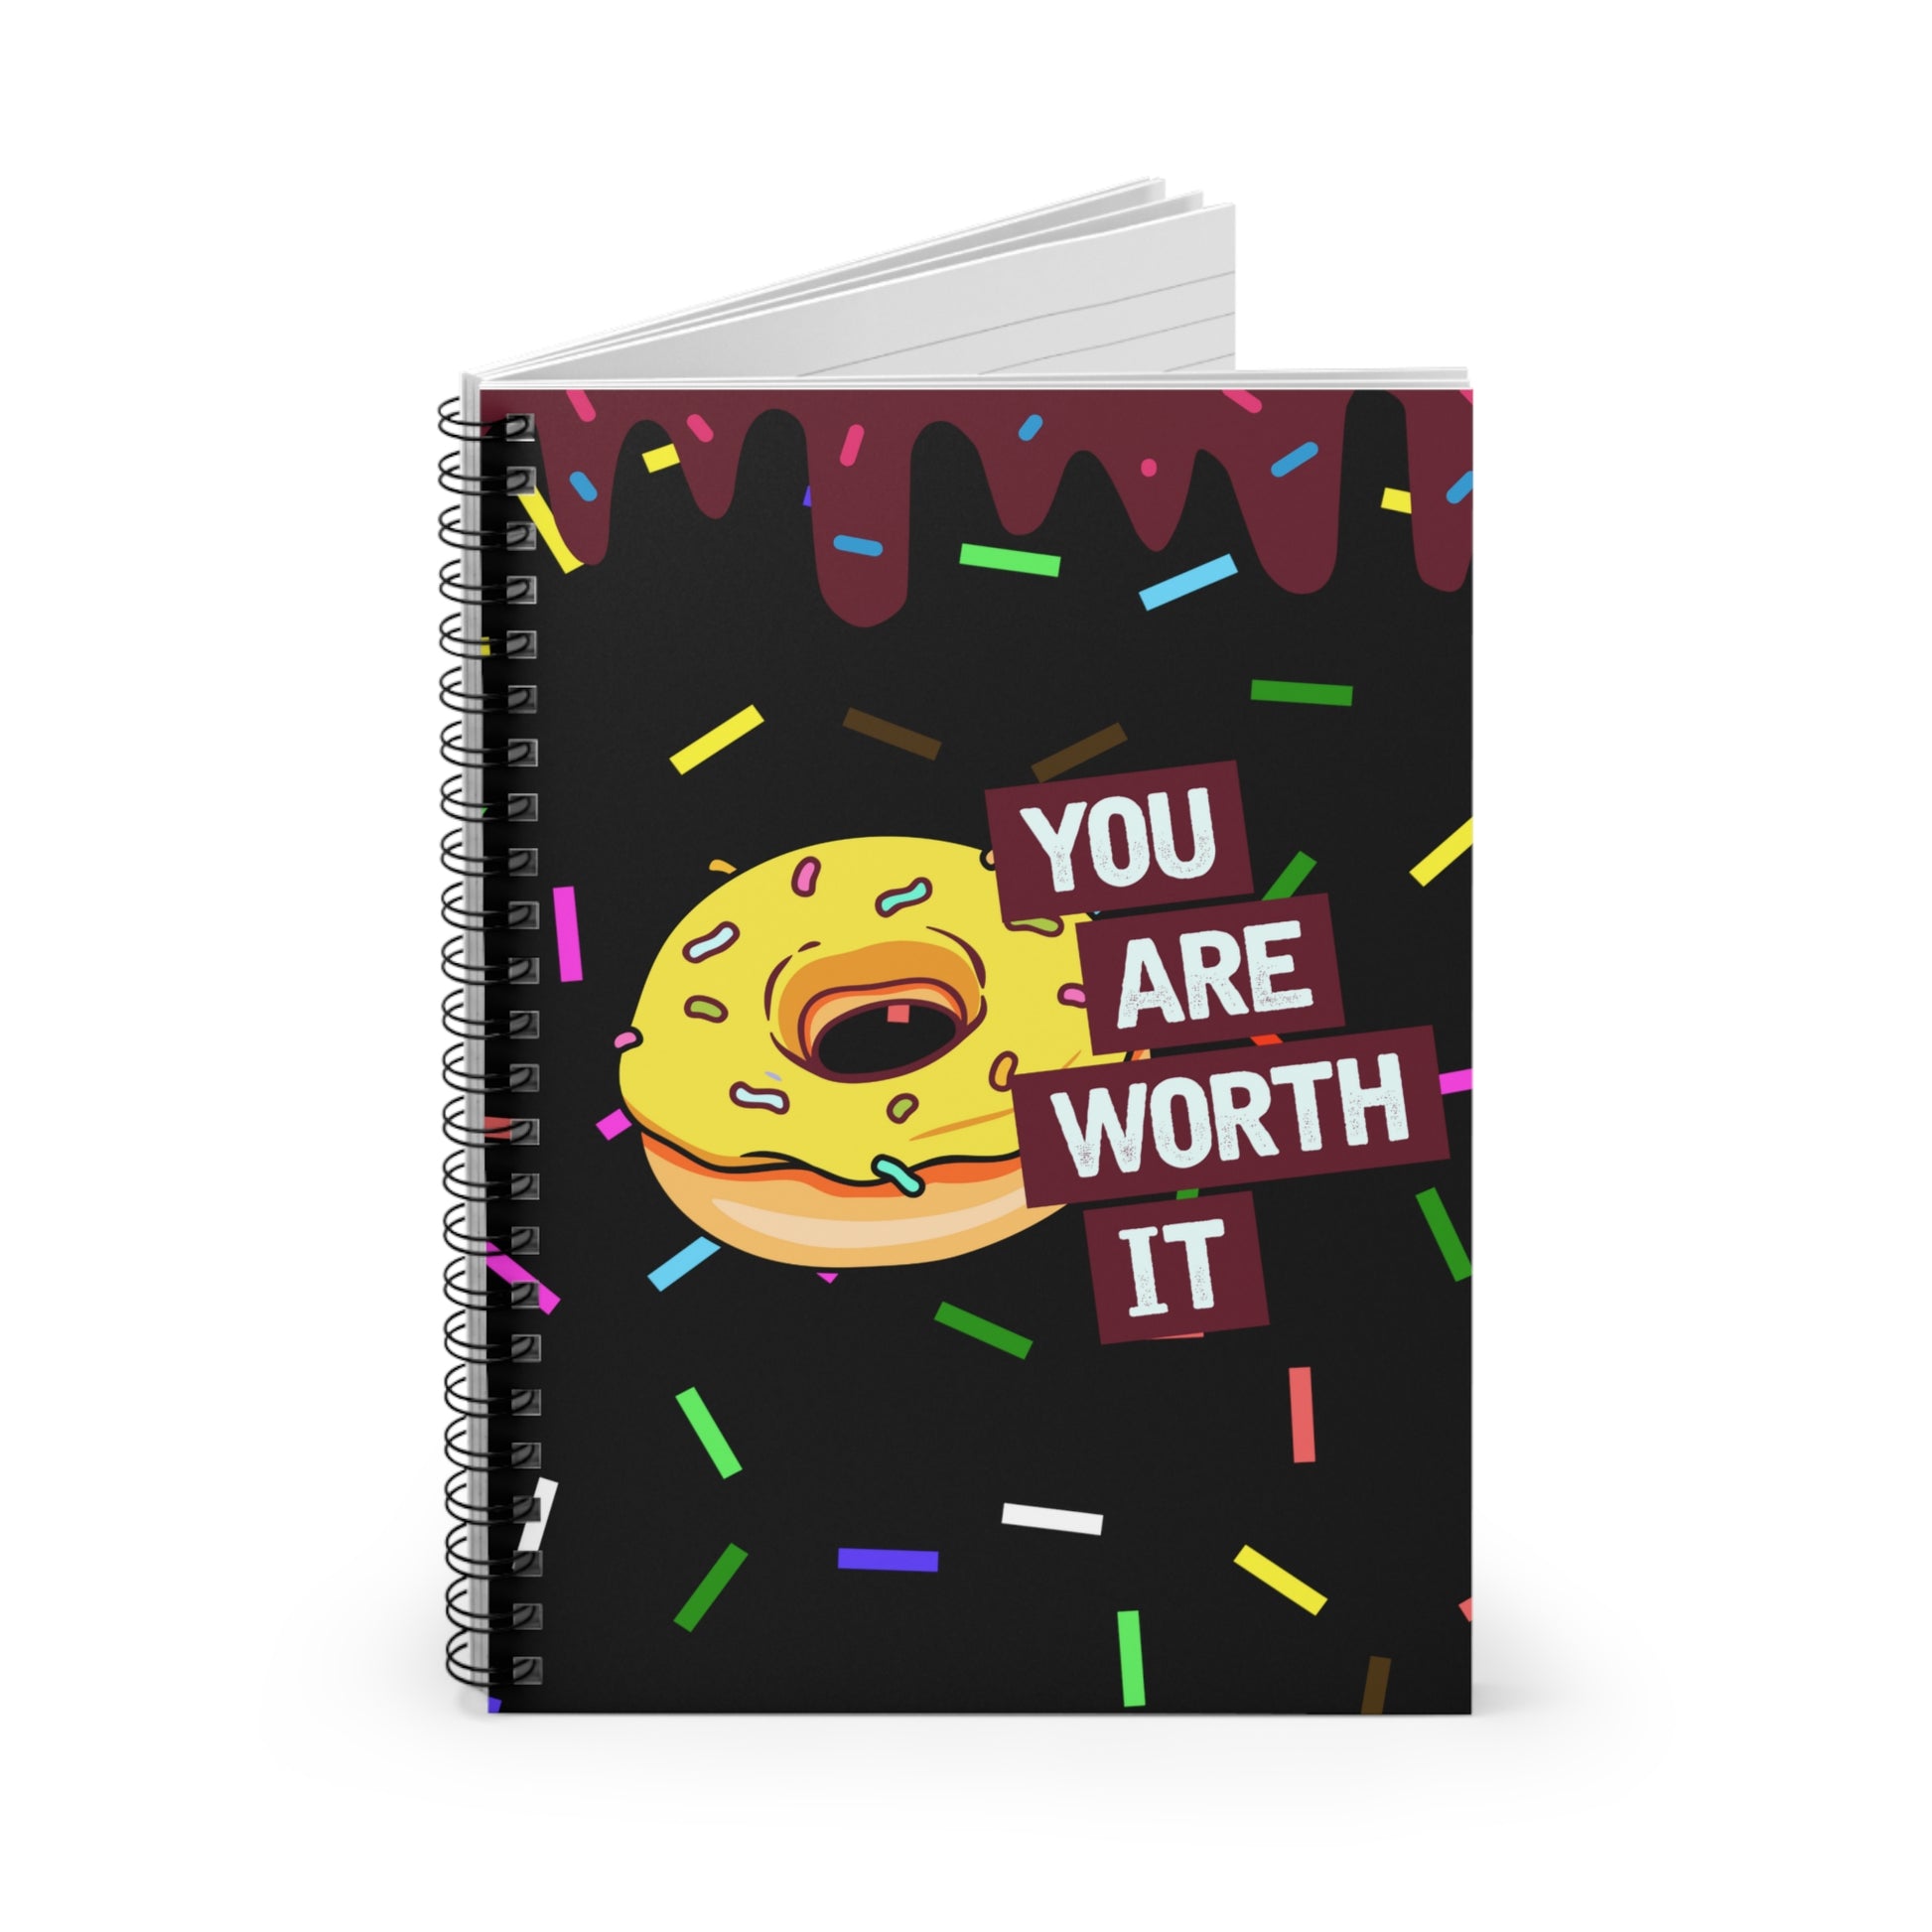 You are Worth it: Spiral Notebook - Log Books - Journals - Diaries - and More Custom Printed by TheGlassyLass